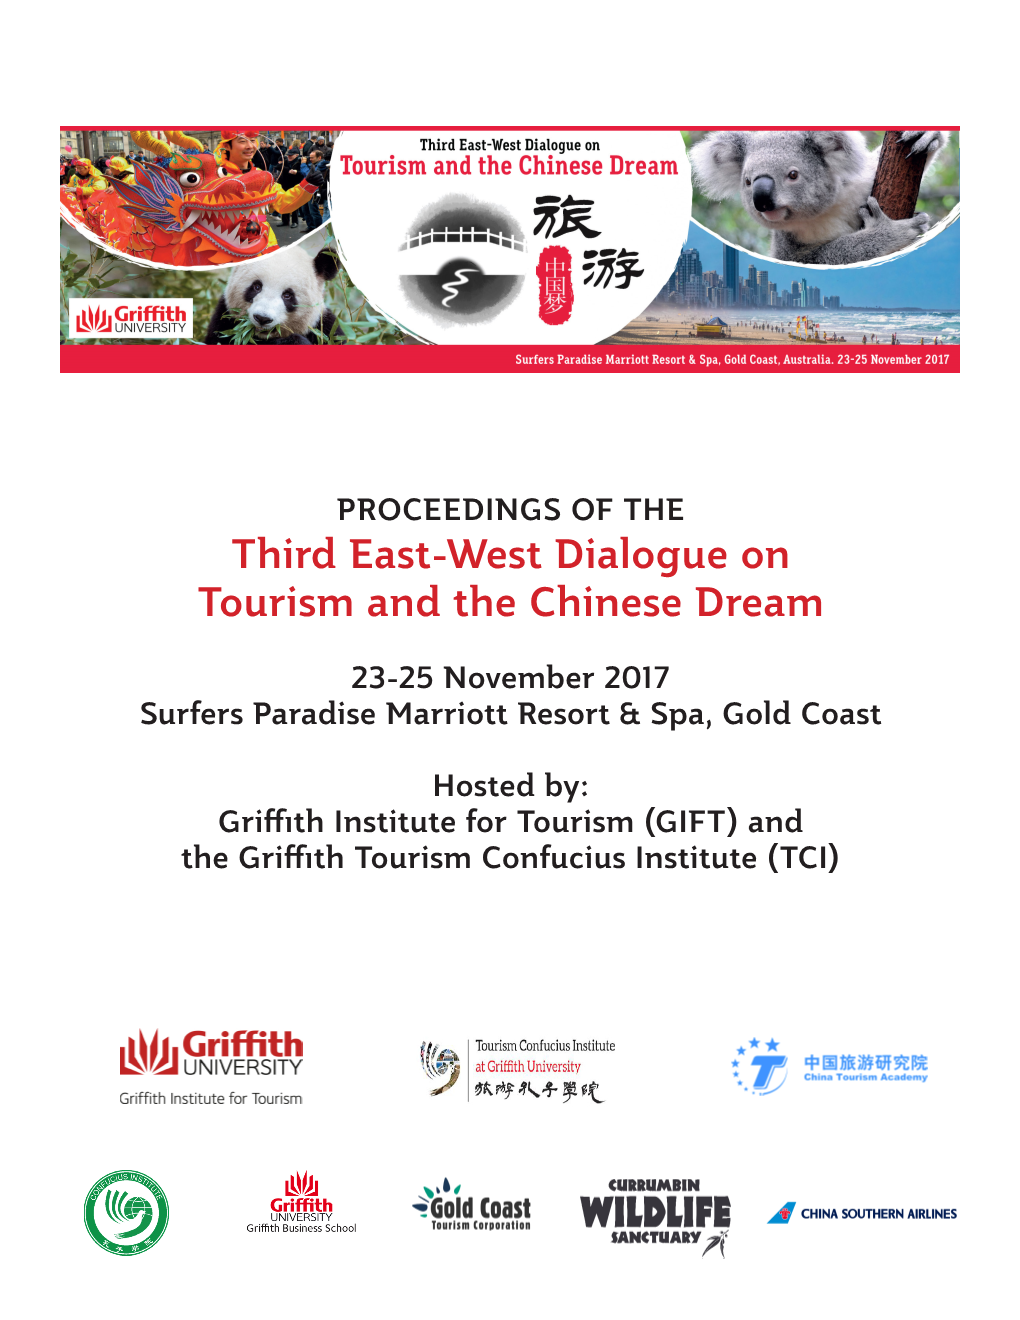 Third East-West Dialogue on Tourism and the Chinese Dream